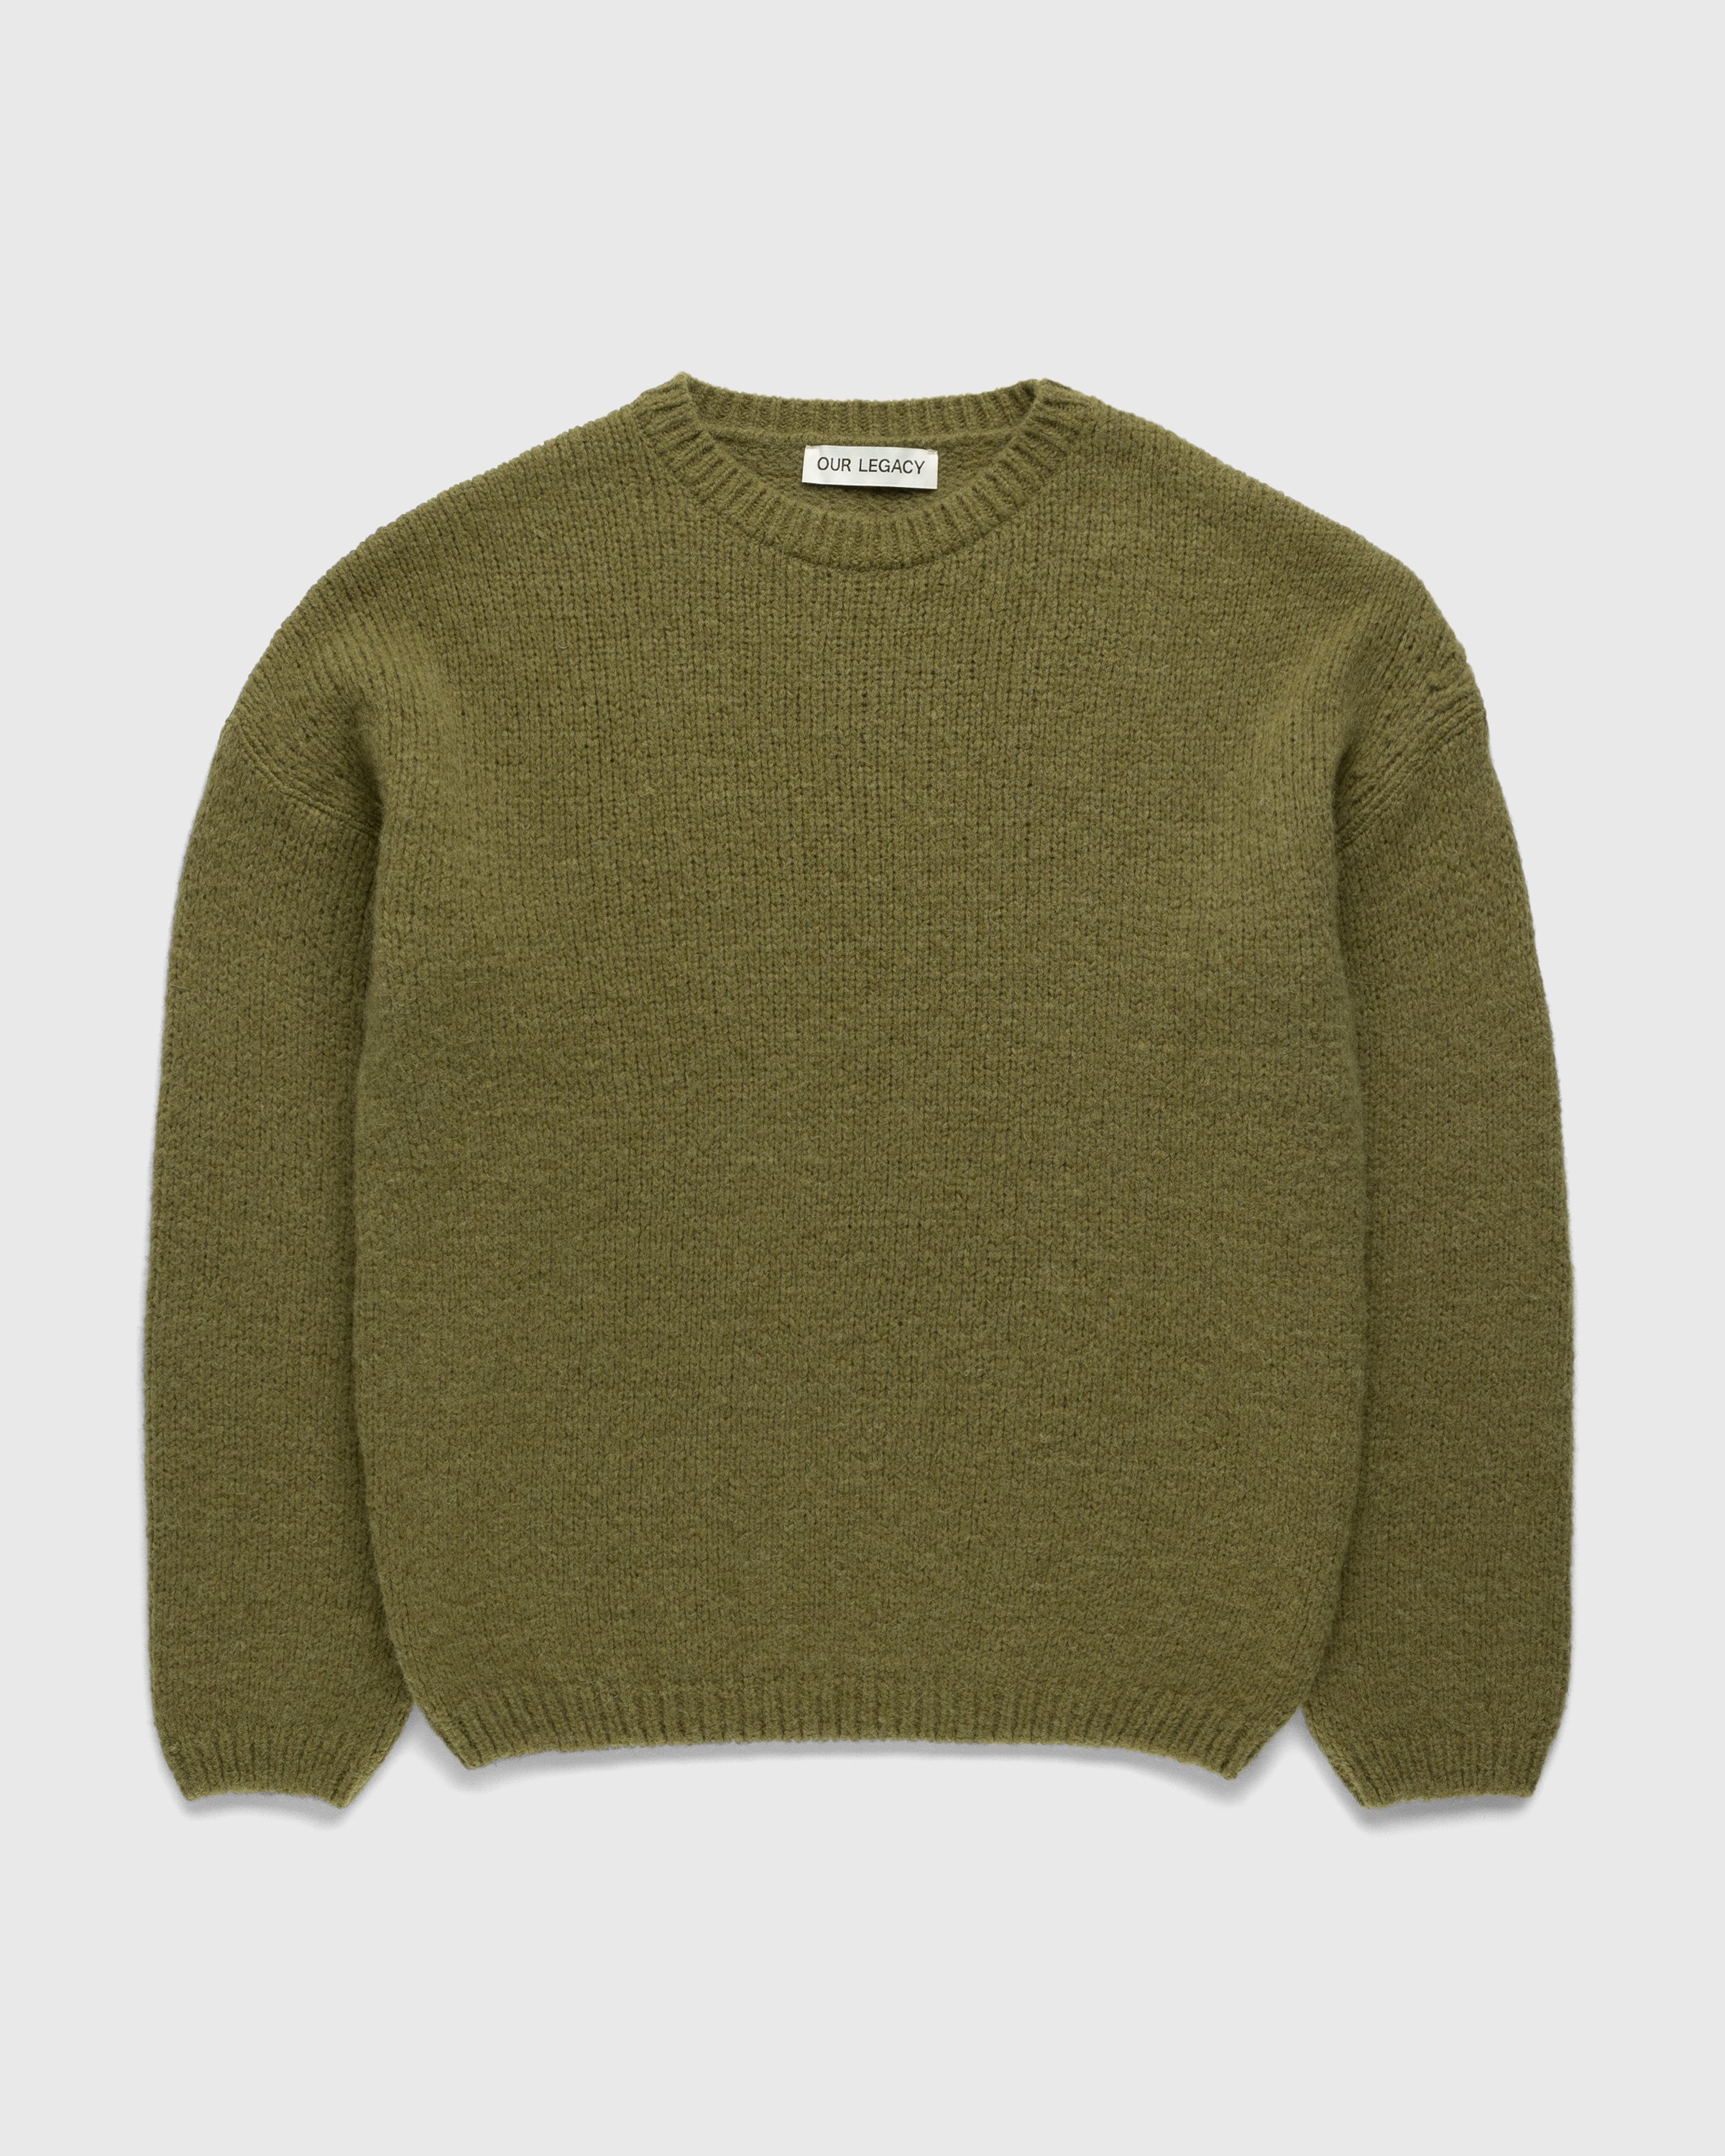 Our Legacy - Popover Roundneck Green - Clothing - Green - Image 1